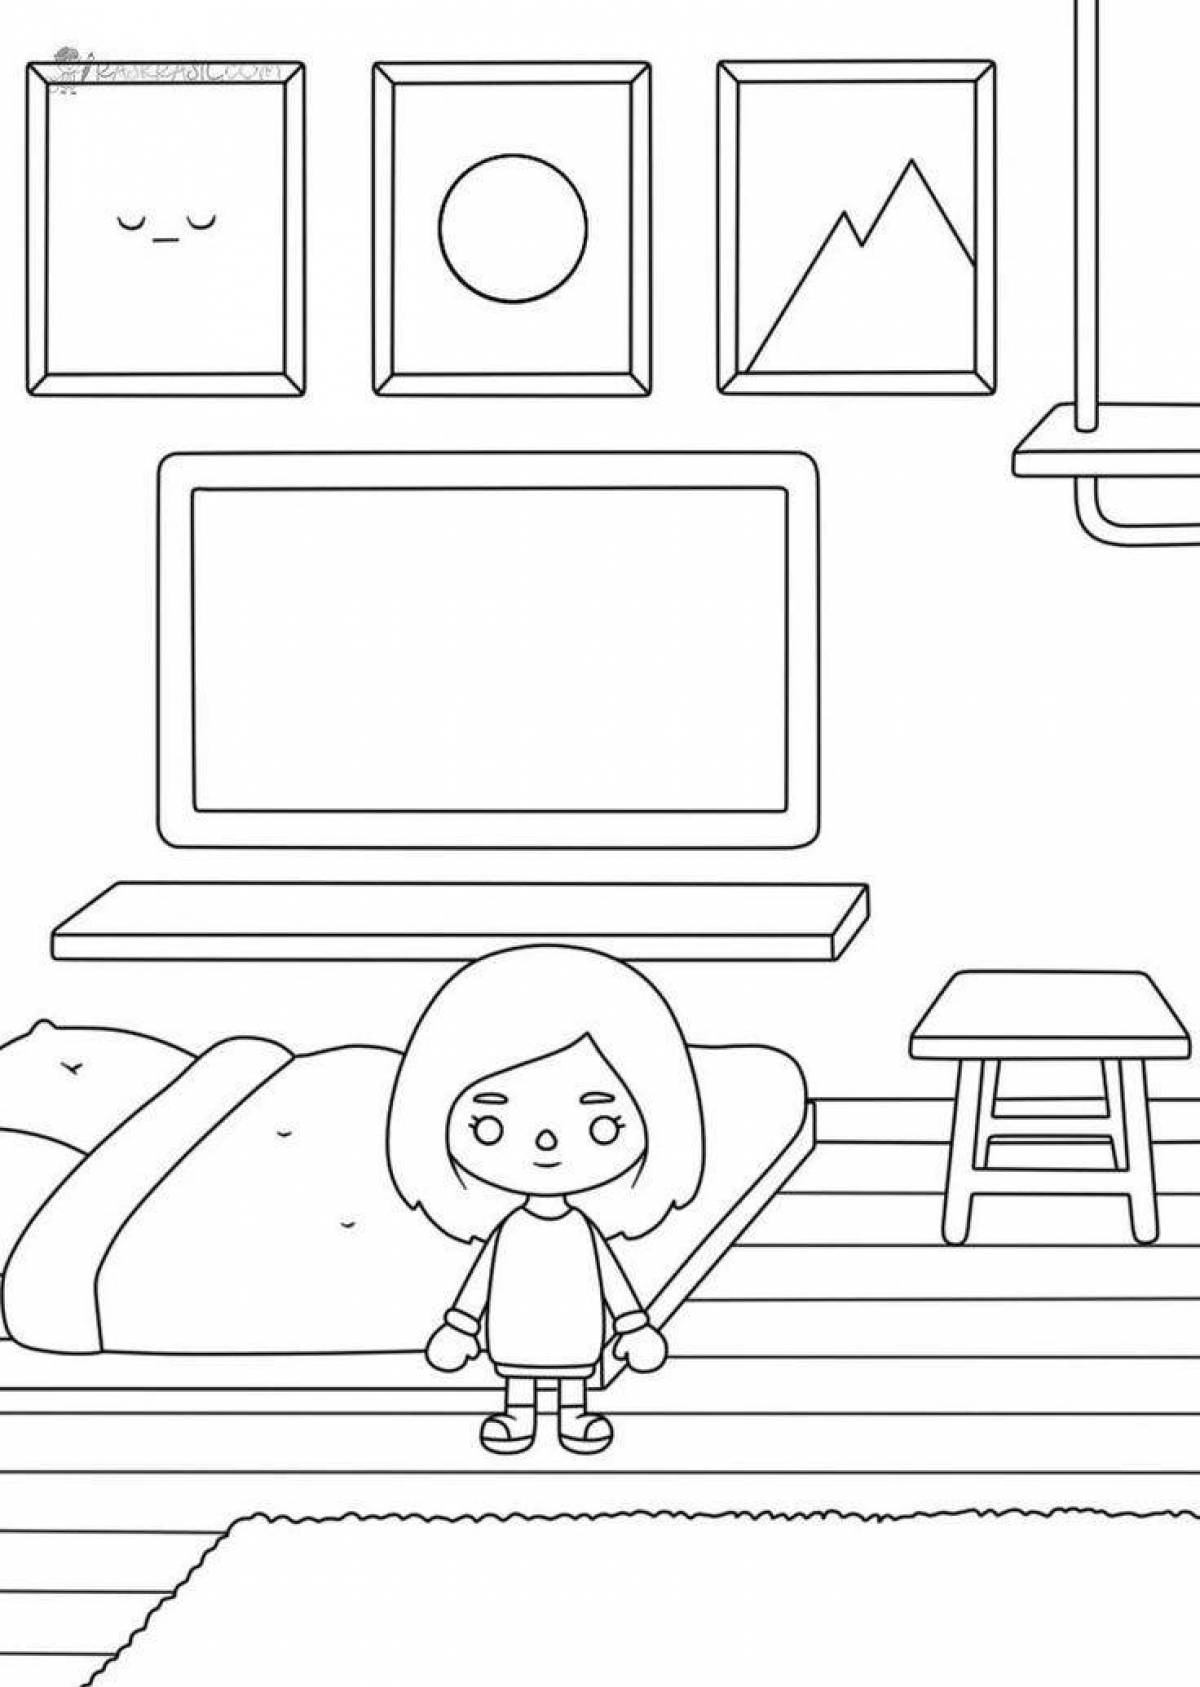 Awesome current house coloring page